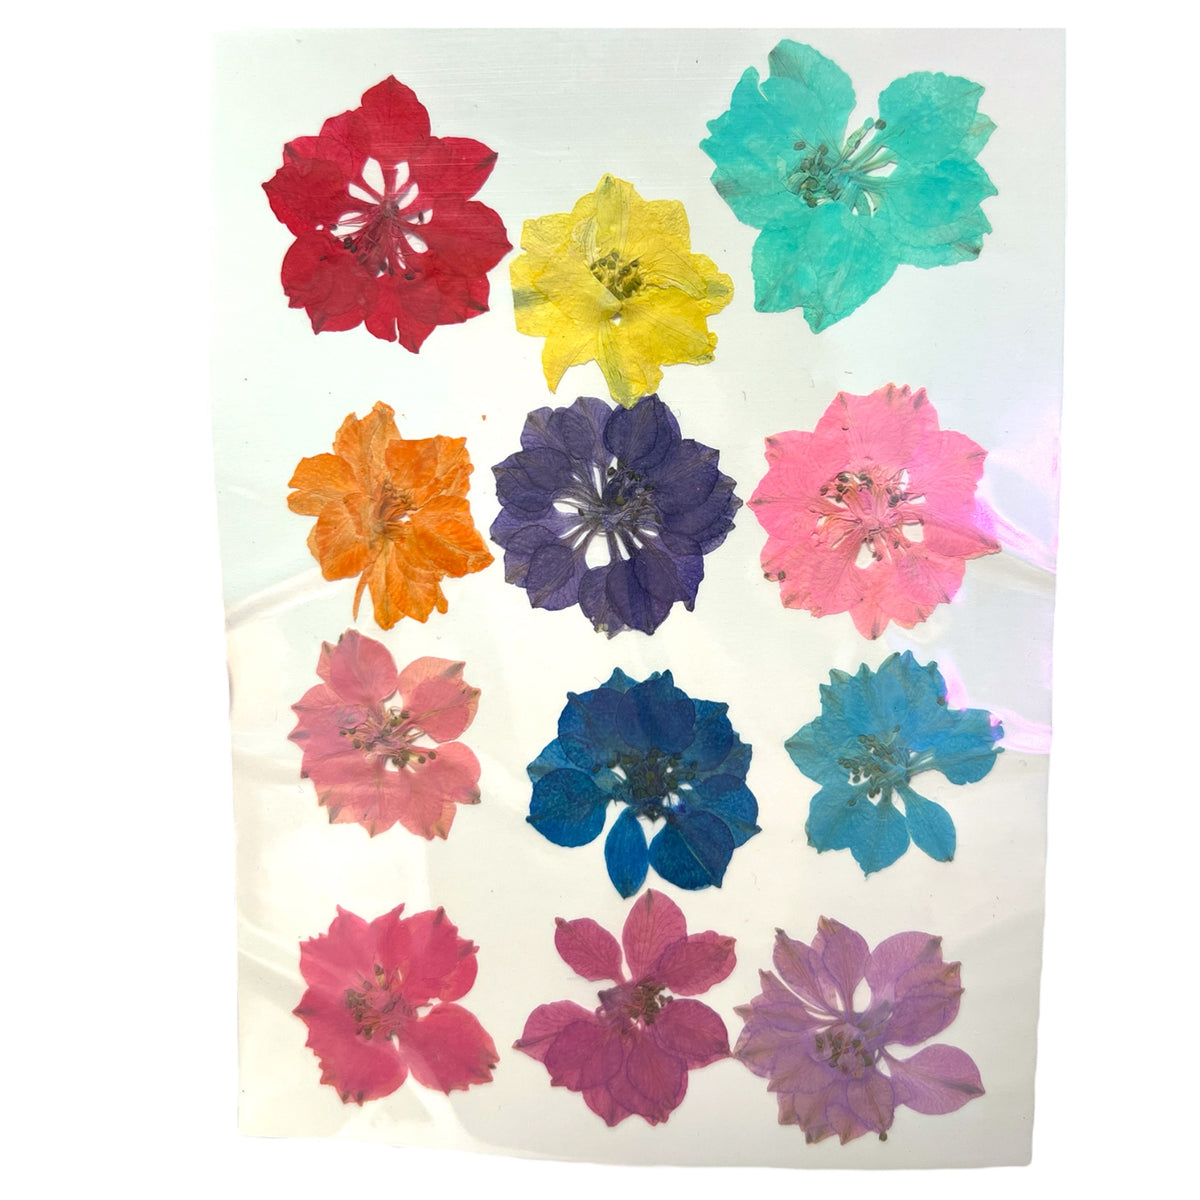 Daydream Believer 12 Piece Multi-colored Variety of Dried Pressed Real Natural Flowers For Epoxy &amp; UV Resin Art